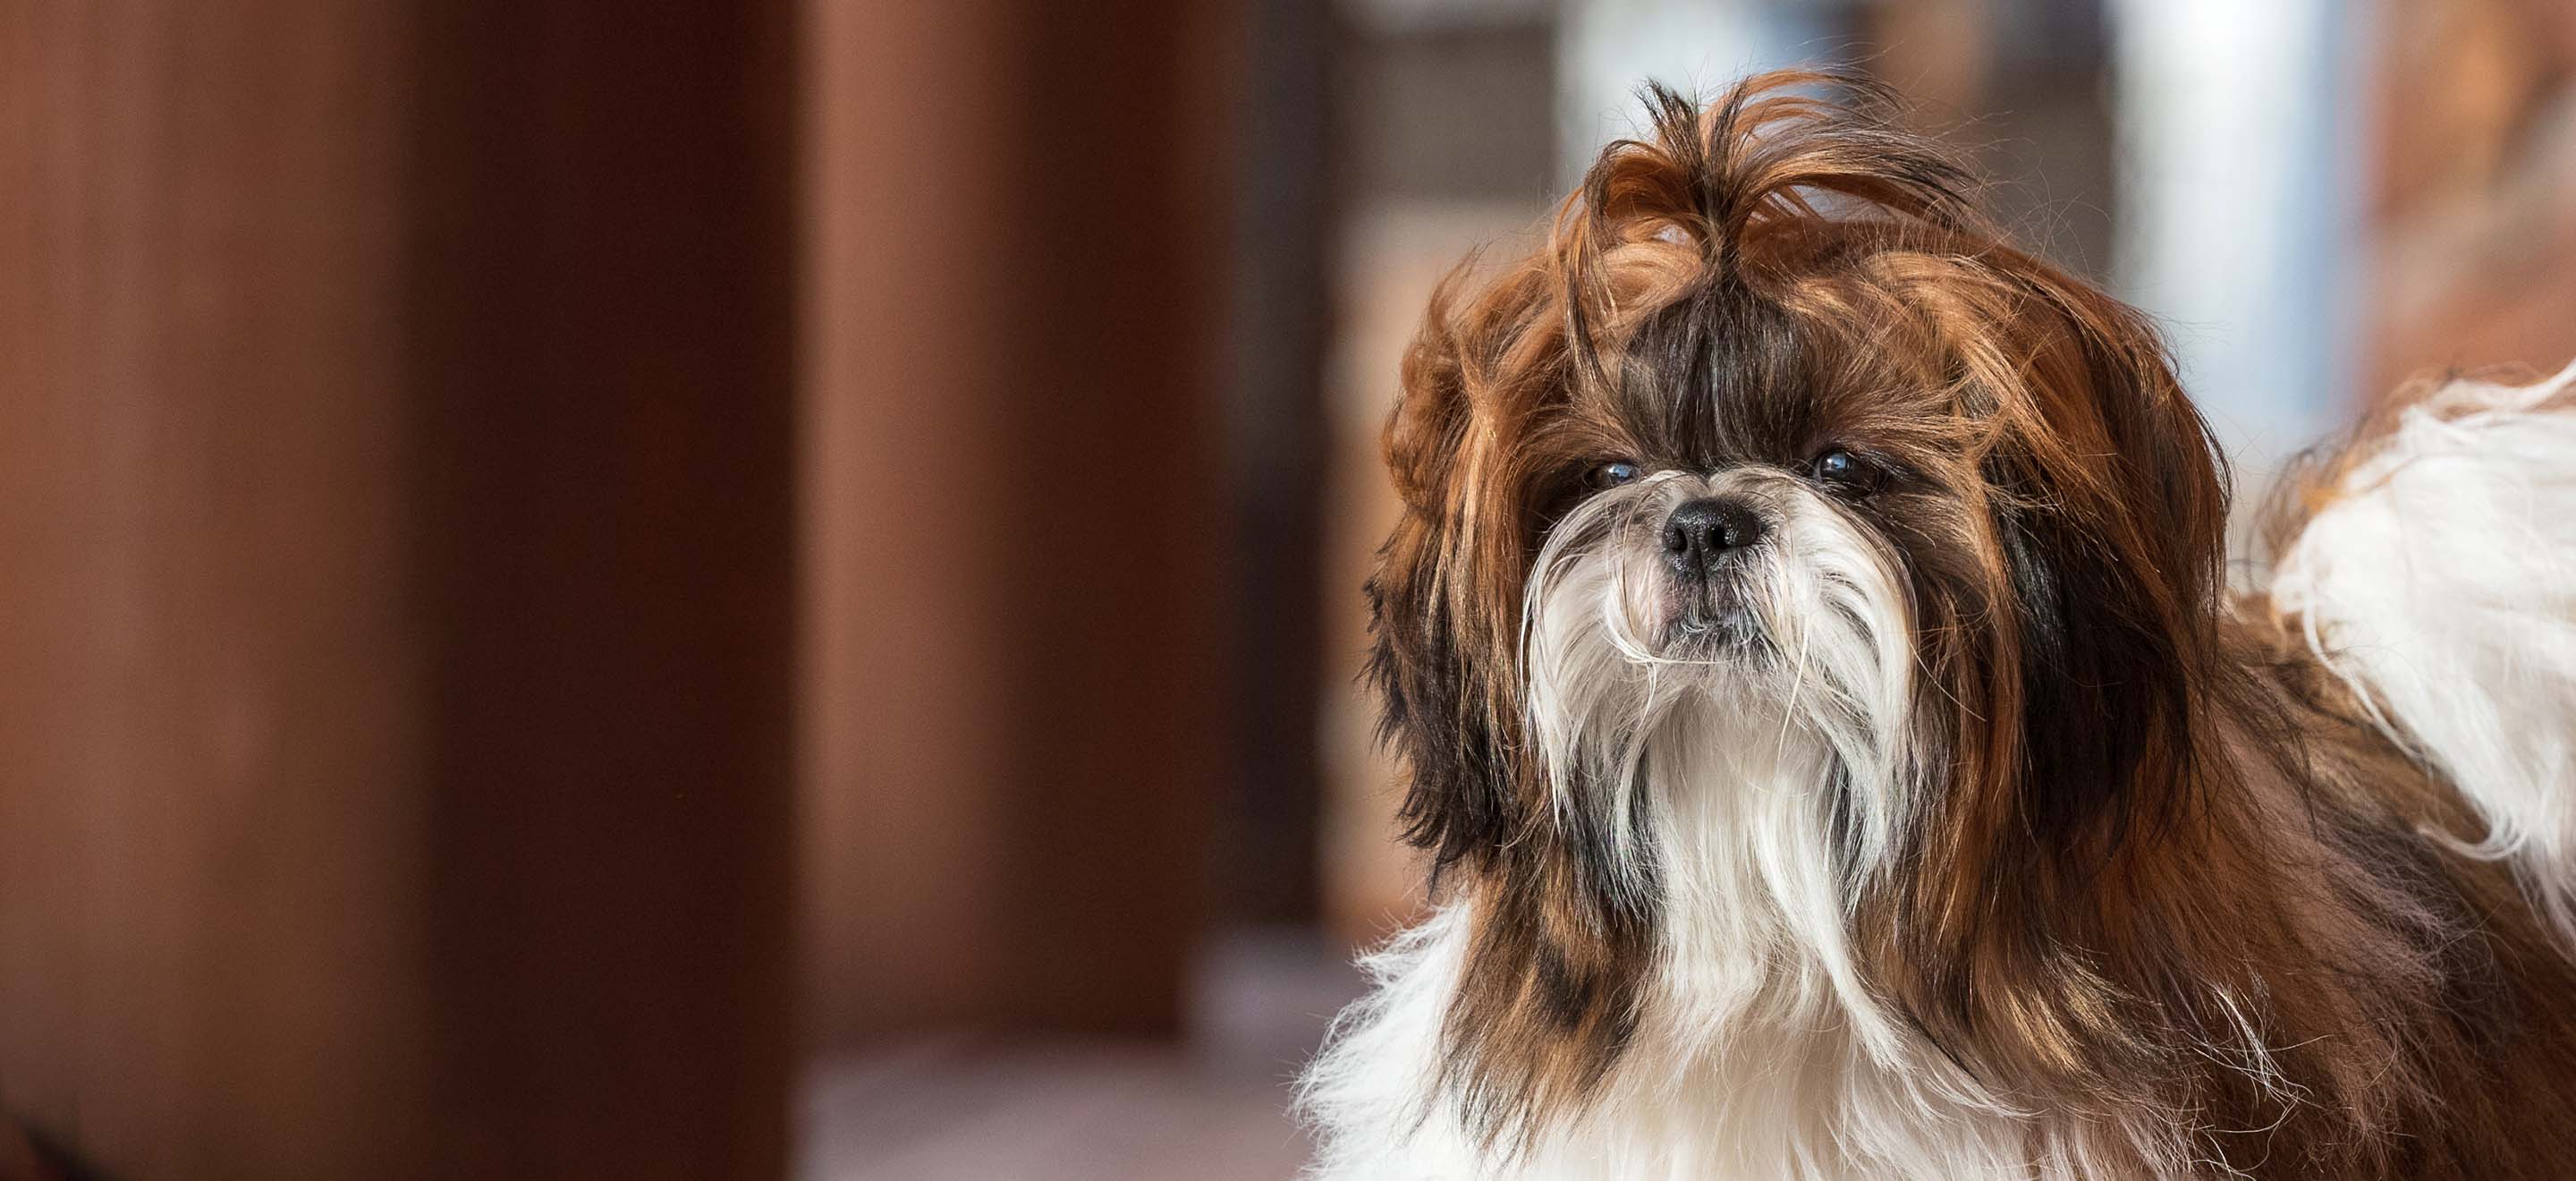 Shih Tzu dog profile (character, diet, care)